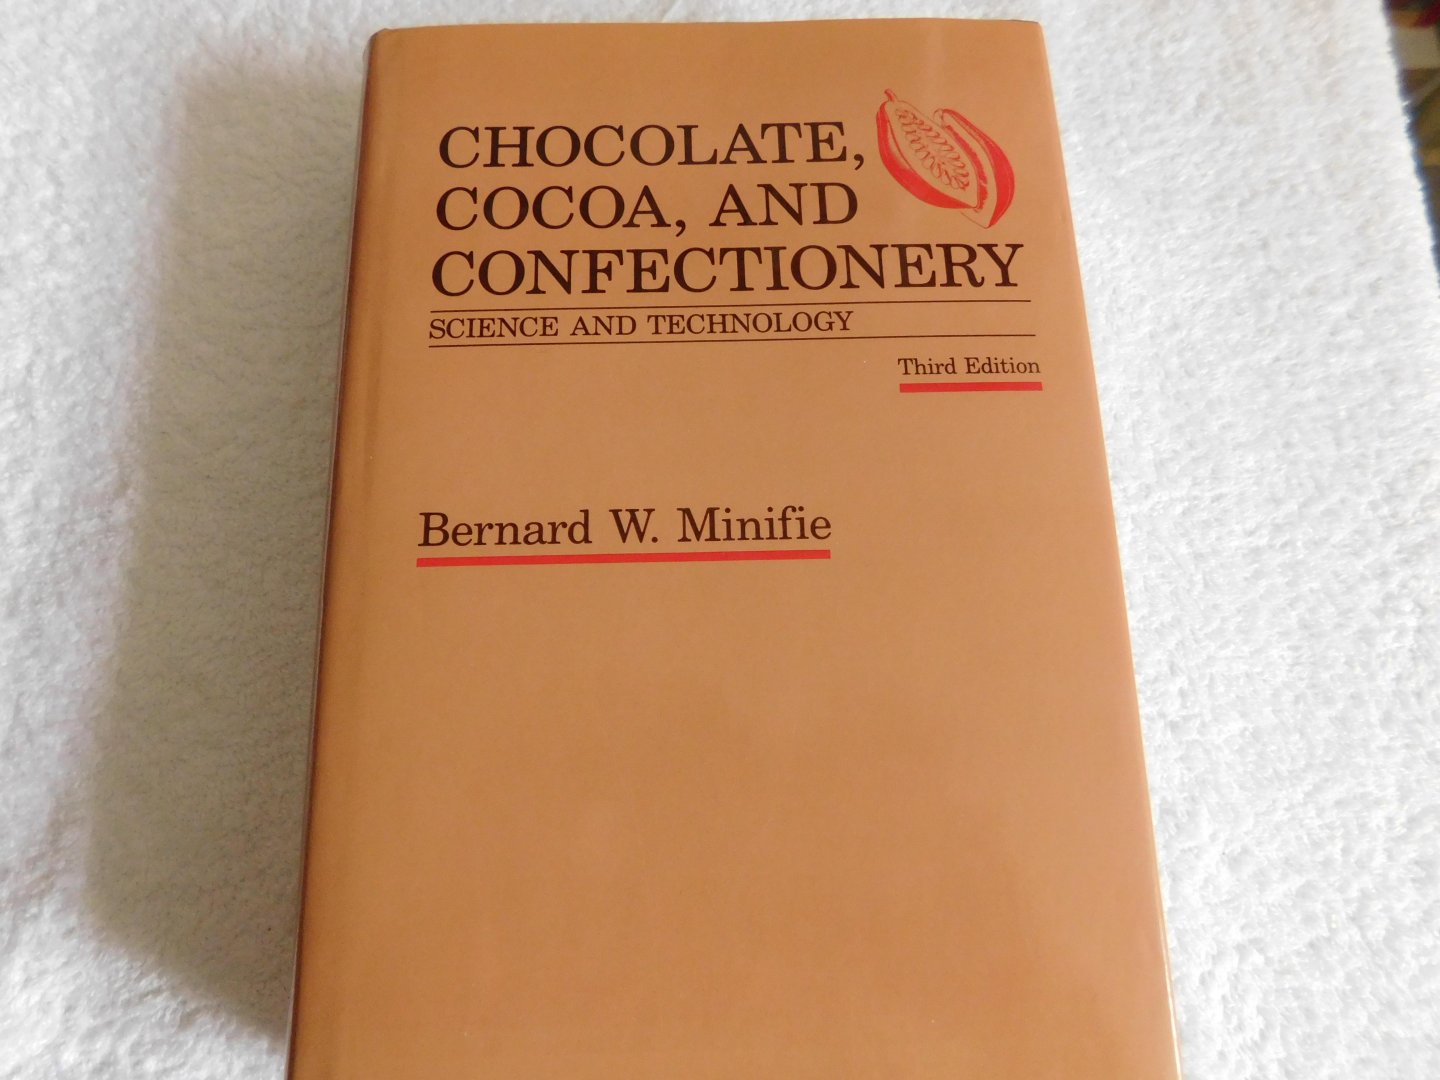 Bernard W. Minifie - Chocolate, Cocoa and Confectionery    ( third edition )